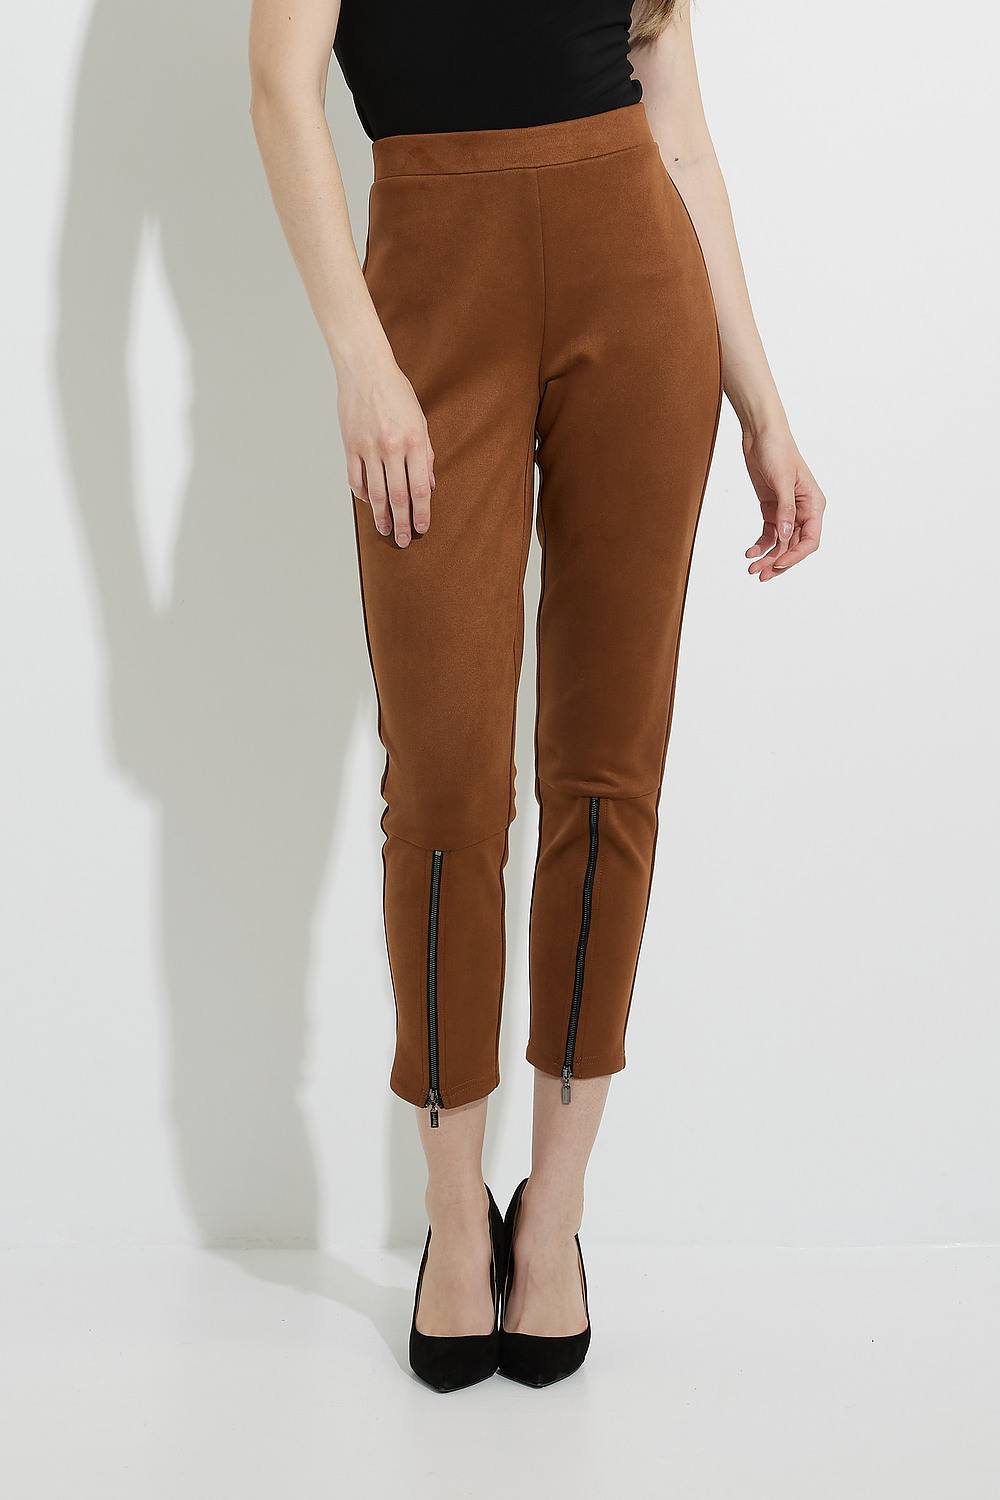 Joseph Ribkoff Faux Suede Pant Style 223181. Brown